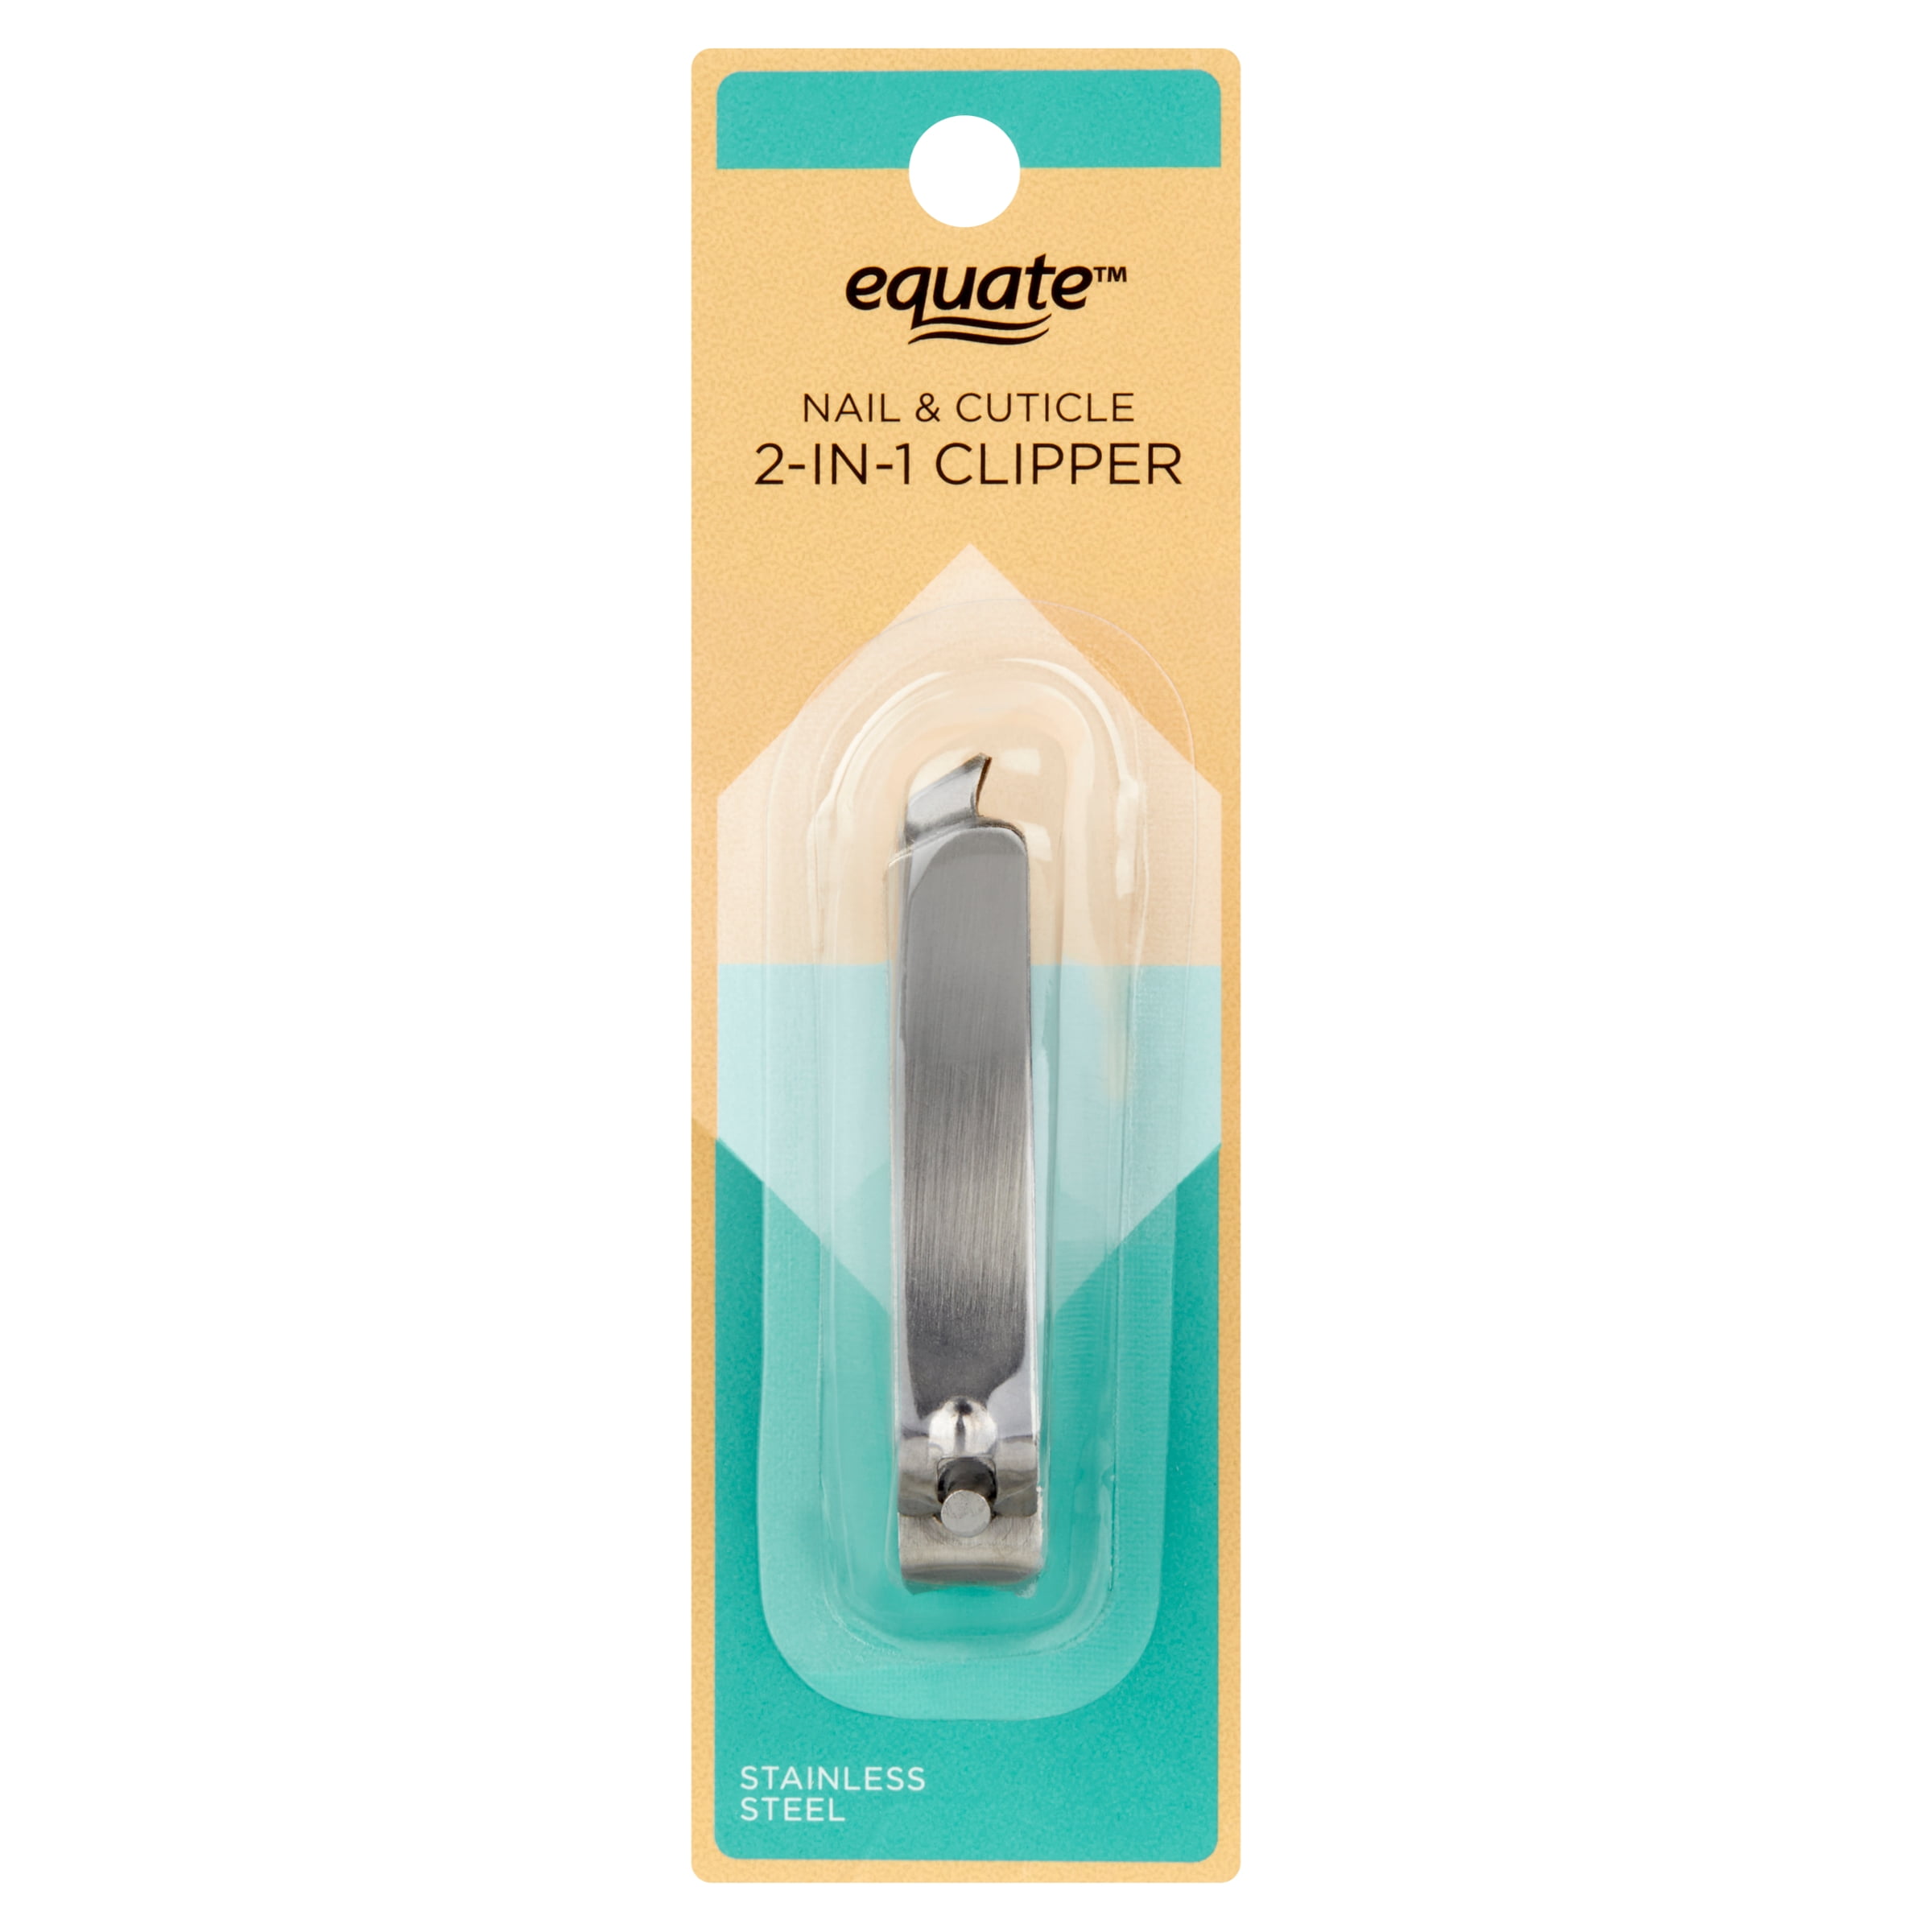 Equate Beauty Stainless Steel 2-in-1 Fingernail & Cuticle Clipper